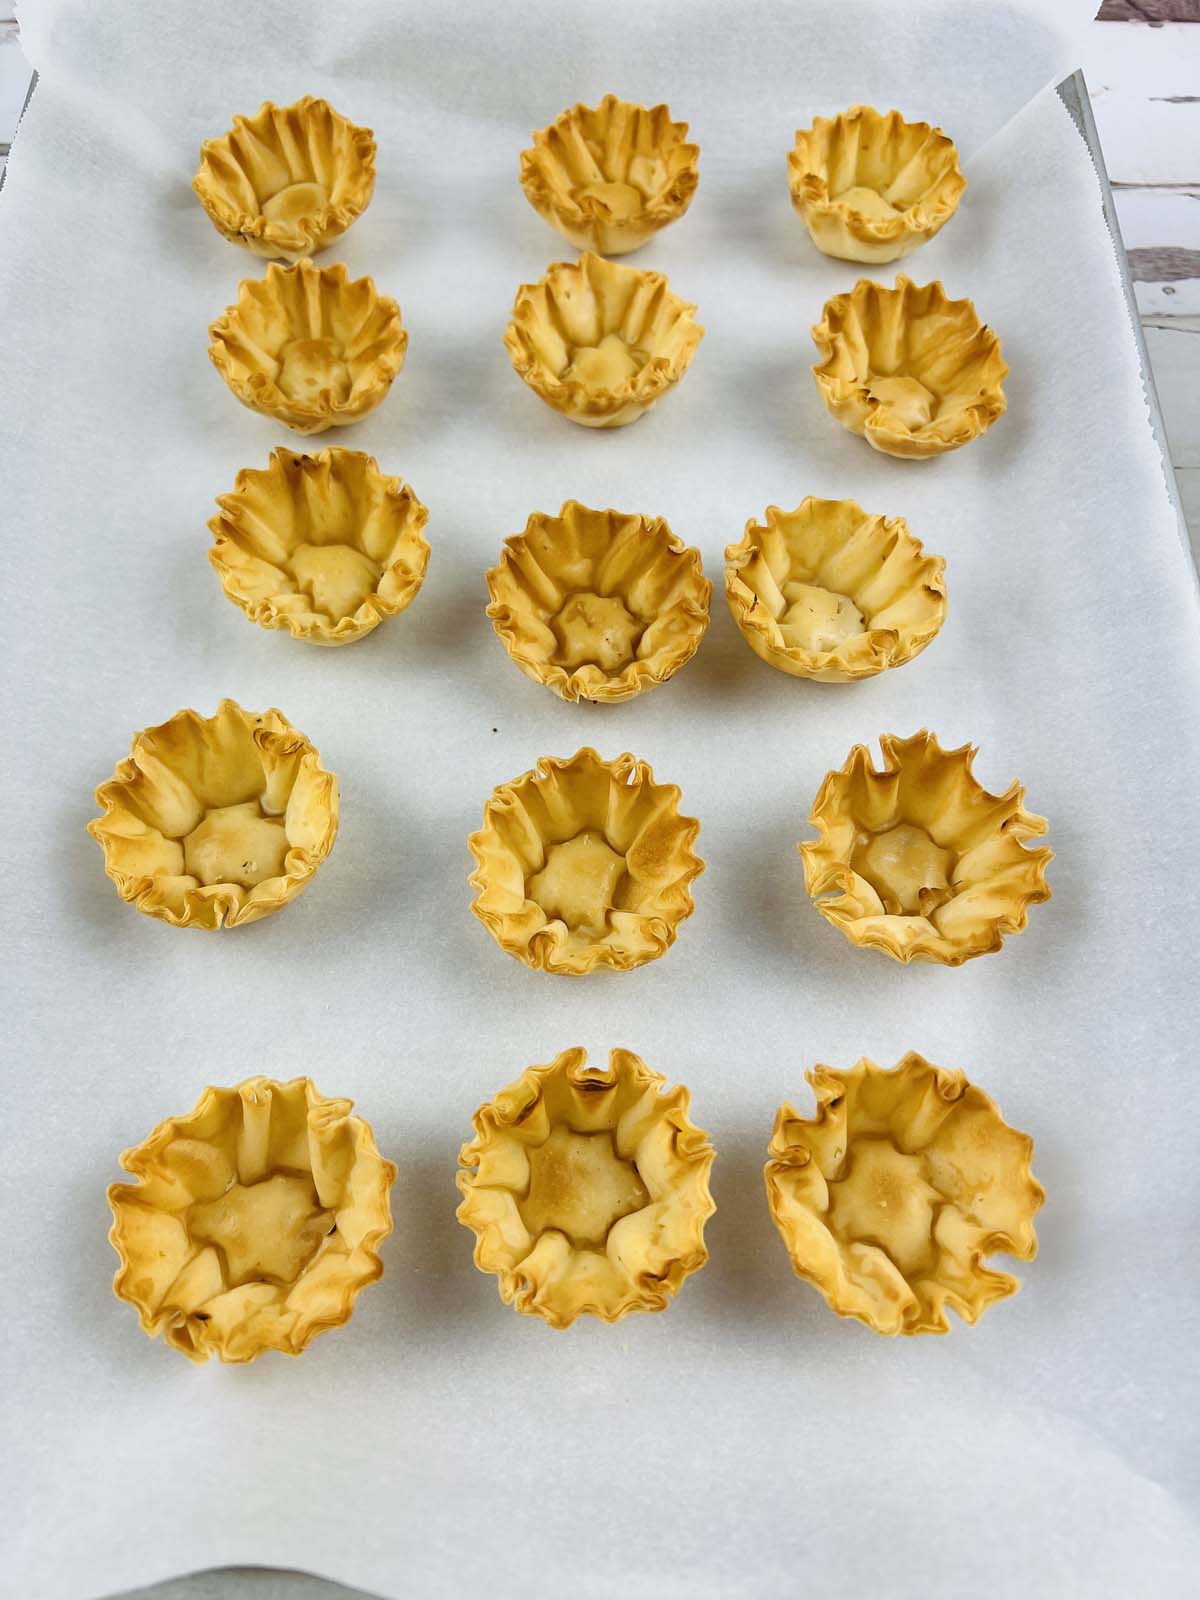 Baked phyllo shells on parchment paper.